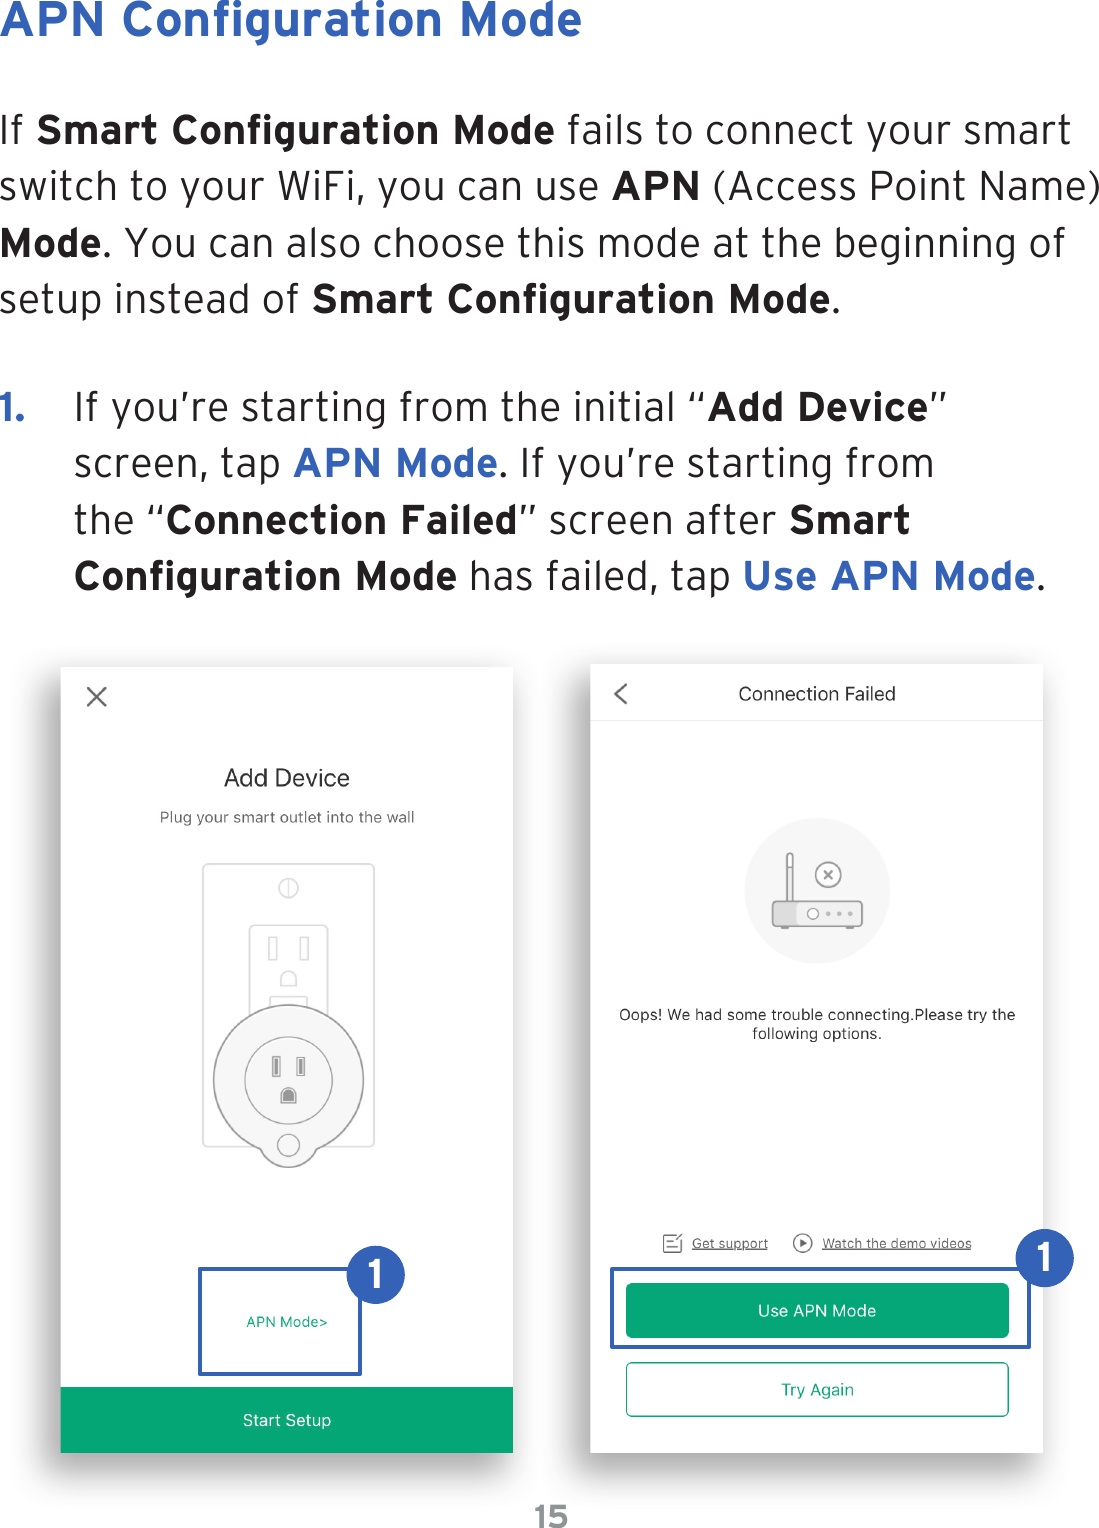 15APN Conguration ModeIf Smart Conguration Mode fails to connect your smart switch to your WiFi, you can use APN (Access Point Name) Mode. You can also choose this mode at the beginning of setup instead of Smart Conguration Mode.1.  If you’re starting from the initial “Add Device” screen, tap APN Mode. If you’re starting from the “Connection Failed” screen after Smart Conguration Mode has failed, tap Use APN Mode.11